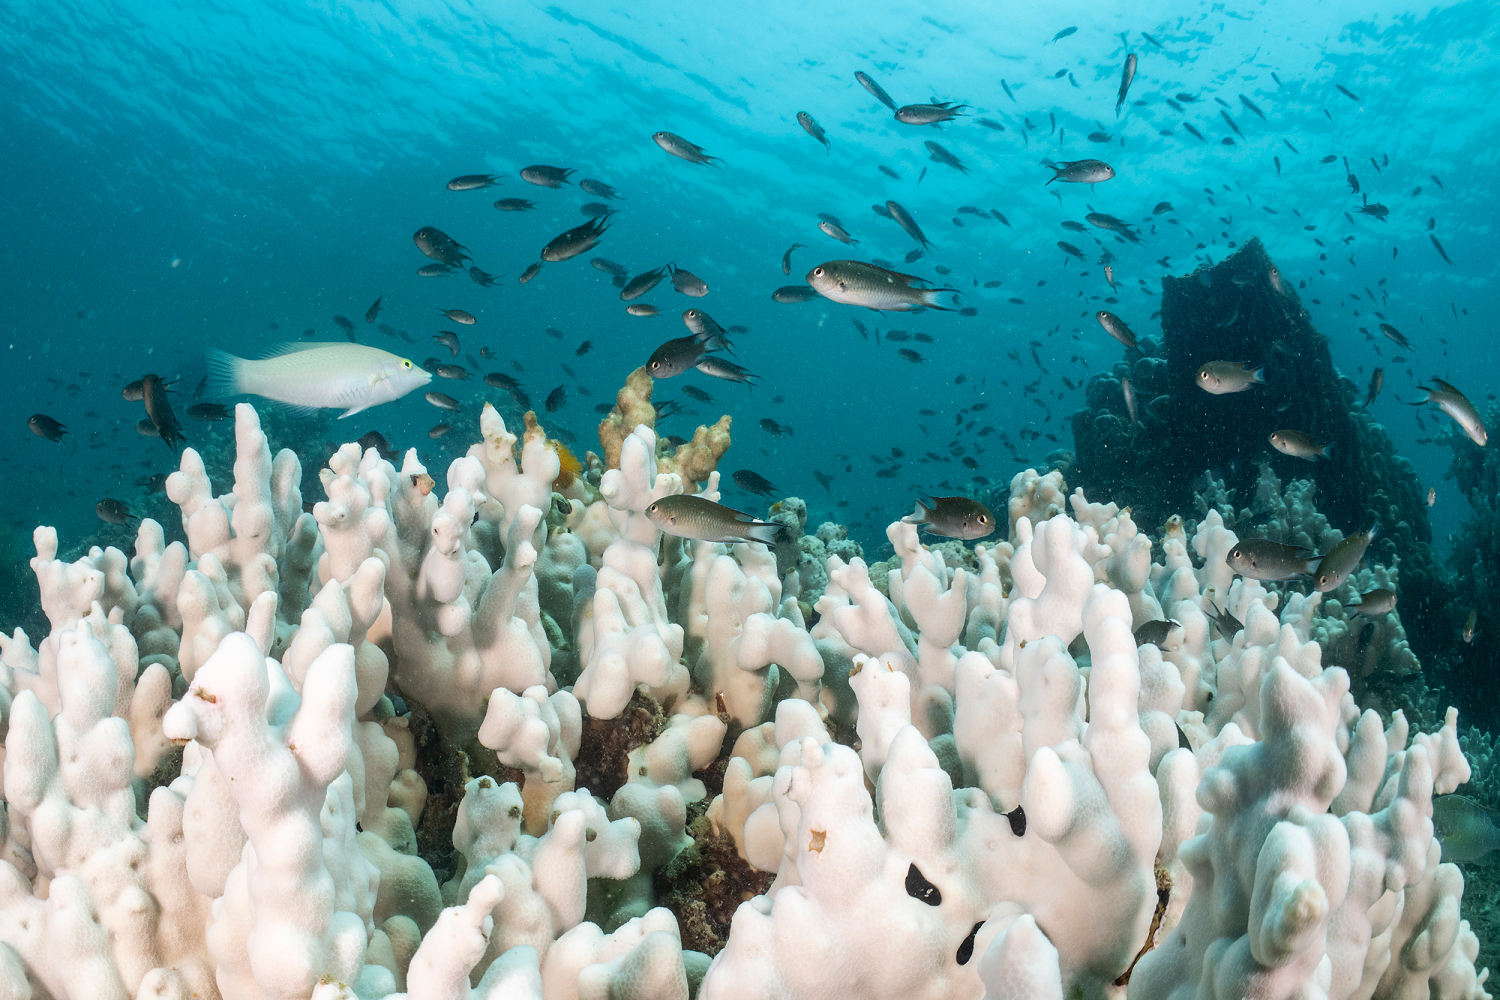 World's oceans have gone 'crazy haywire,' officials warn, with majority of coral reefs in peril